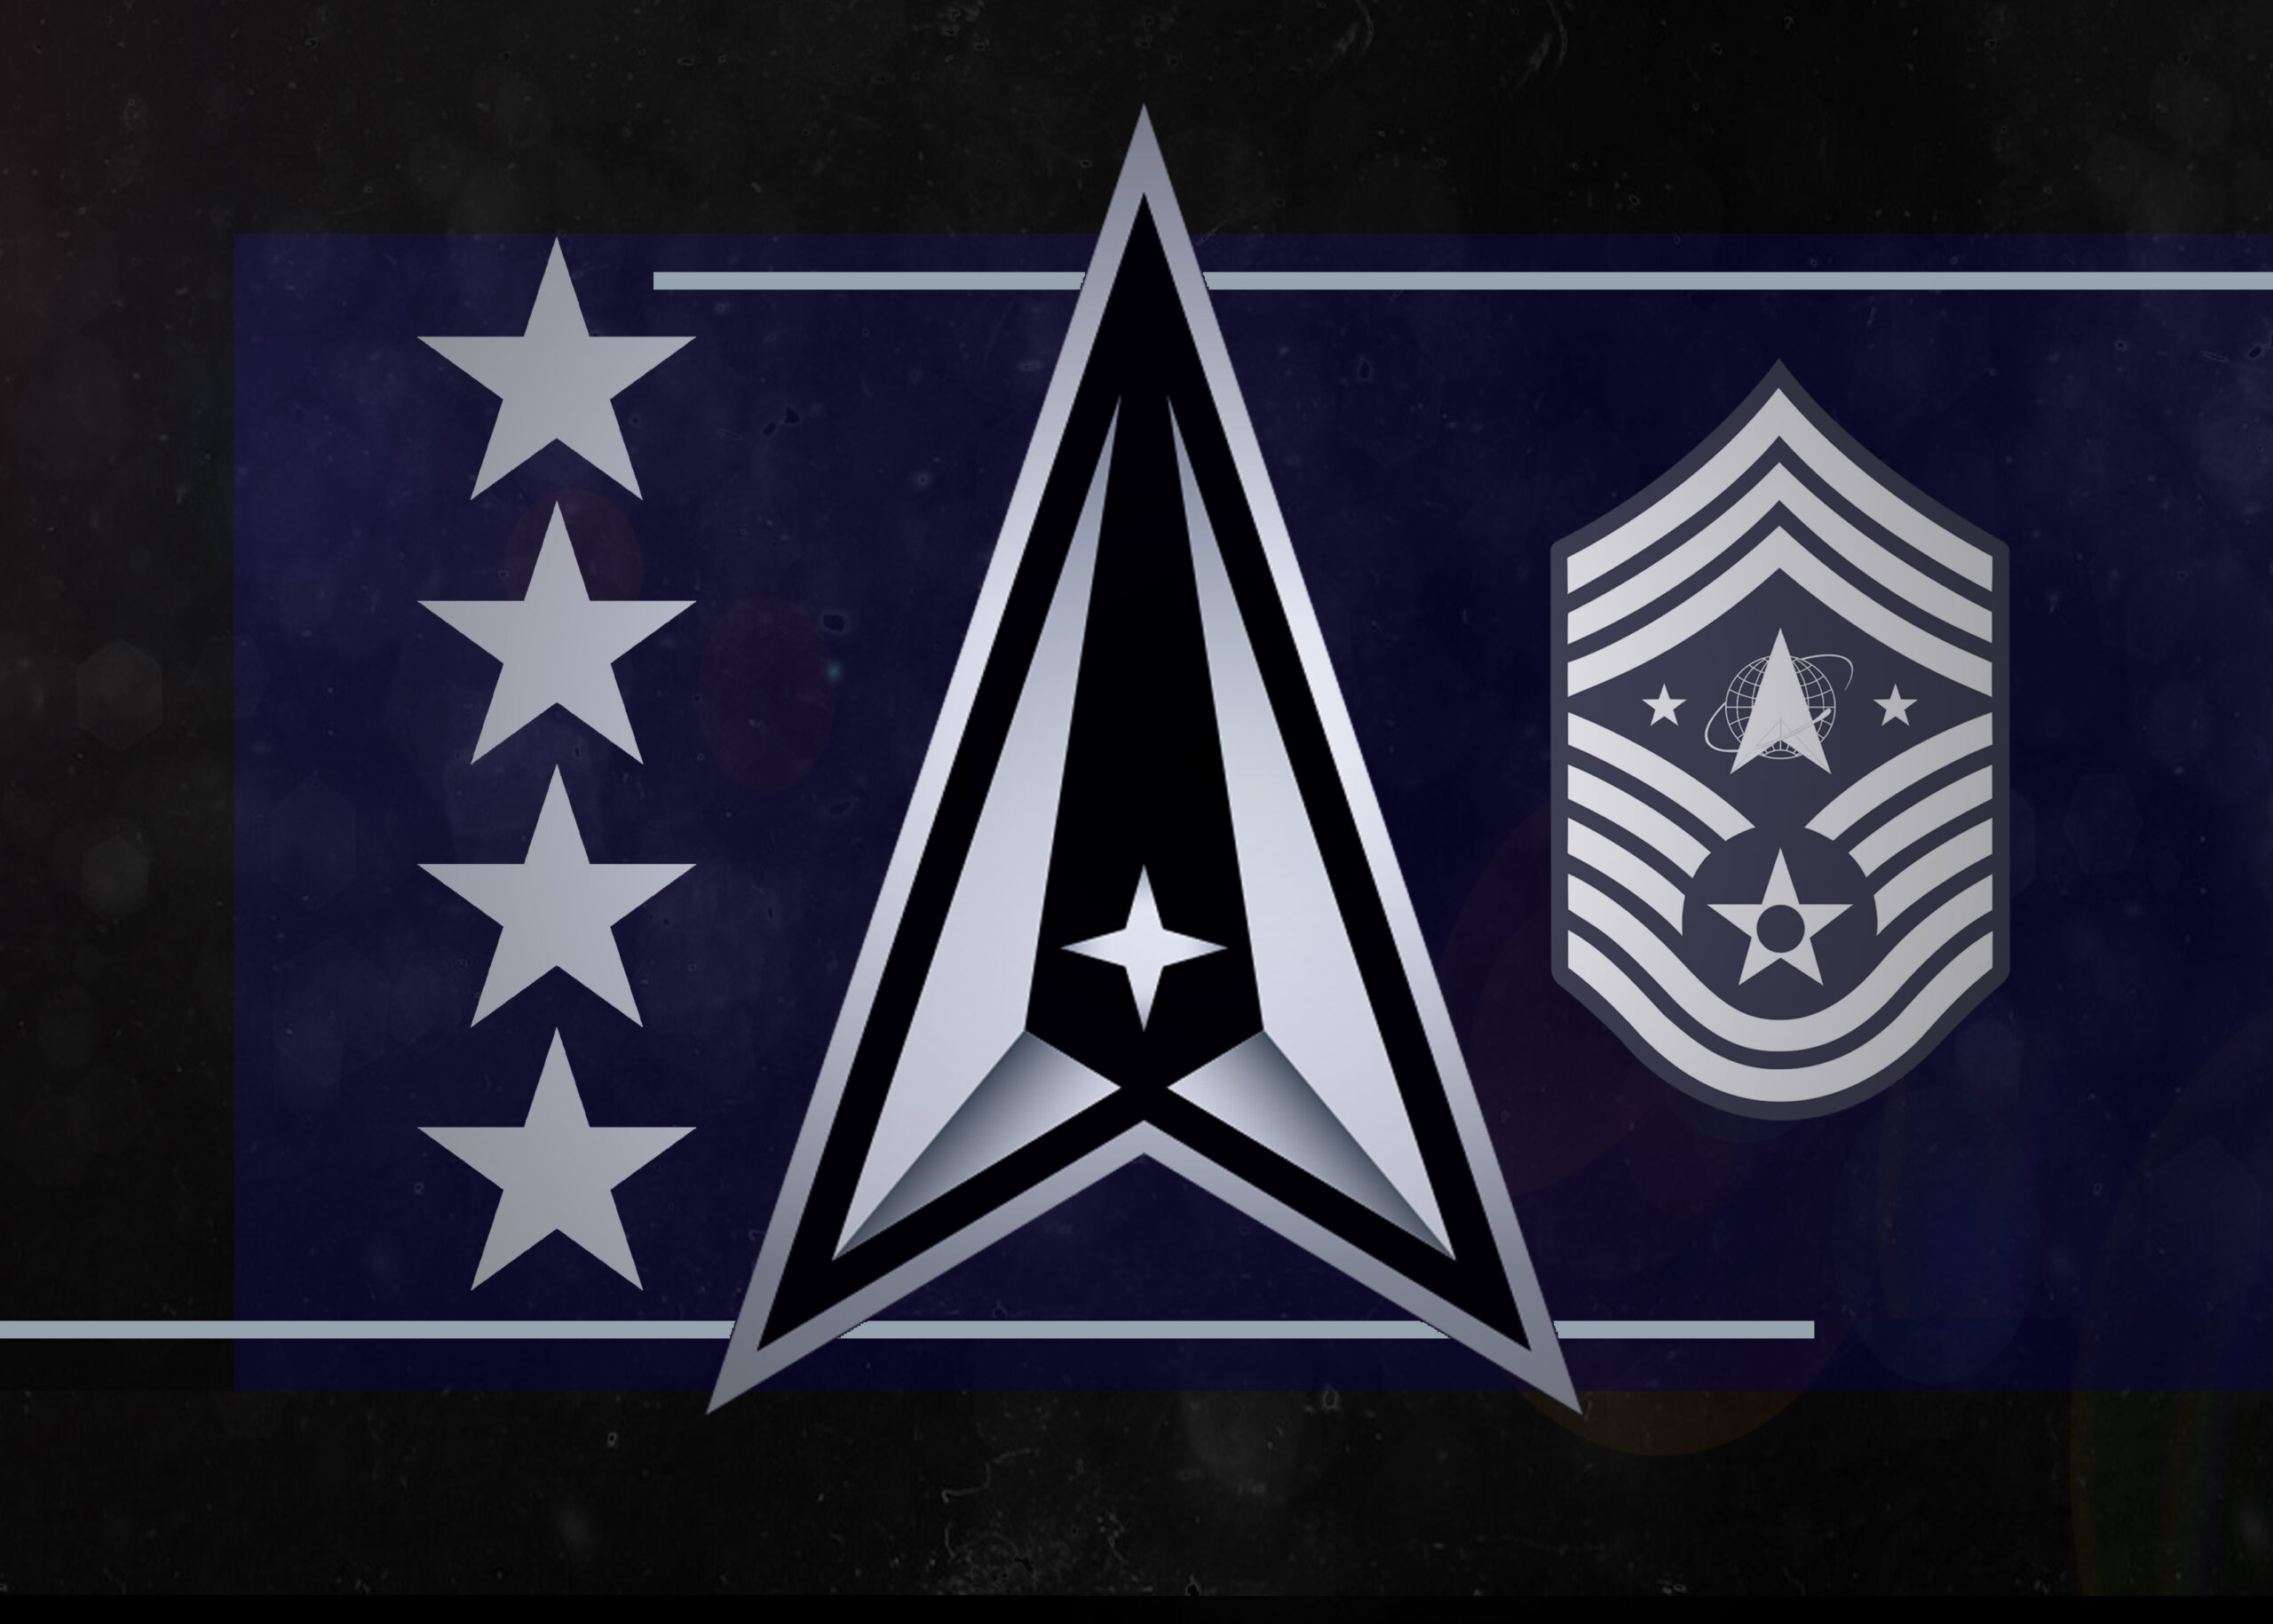 Space Force Rank